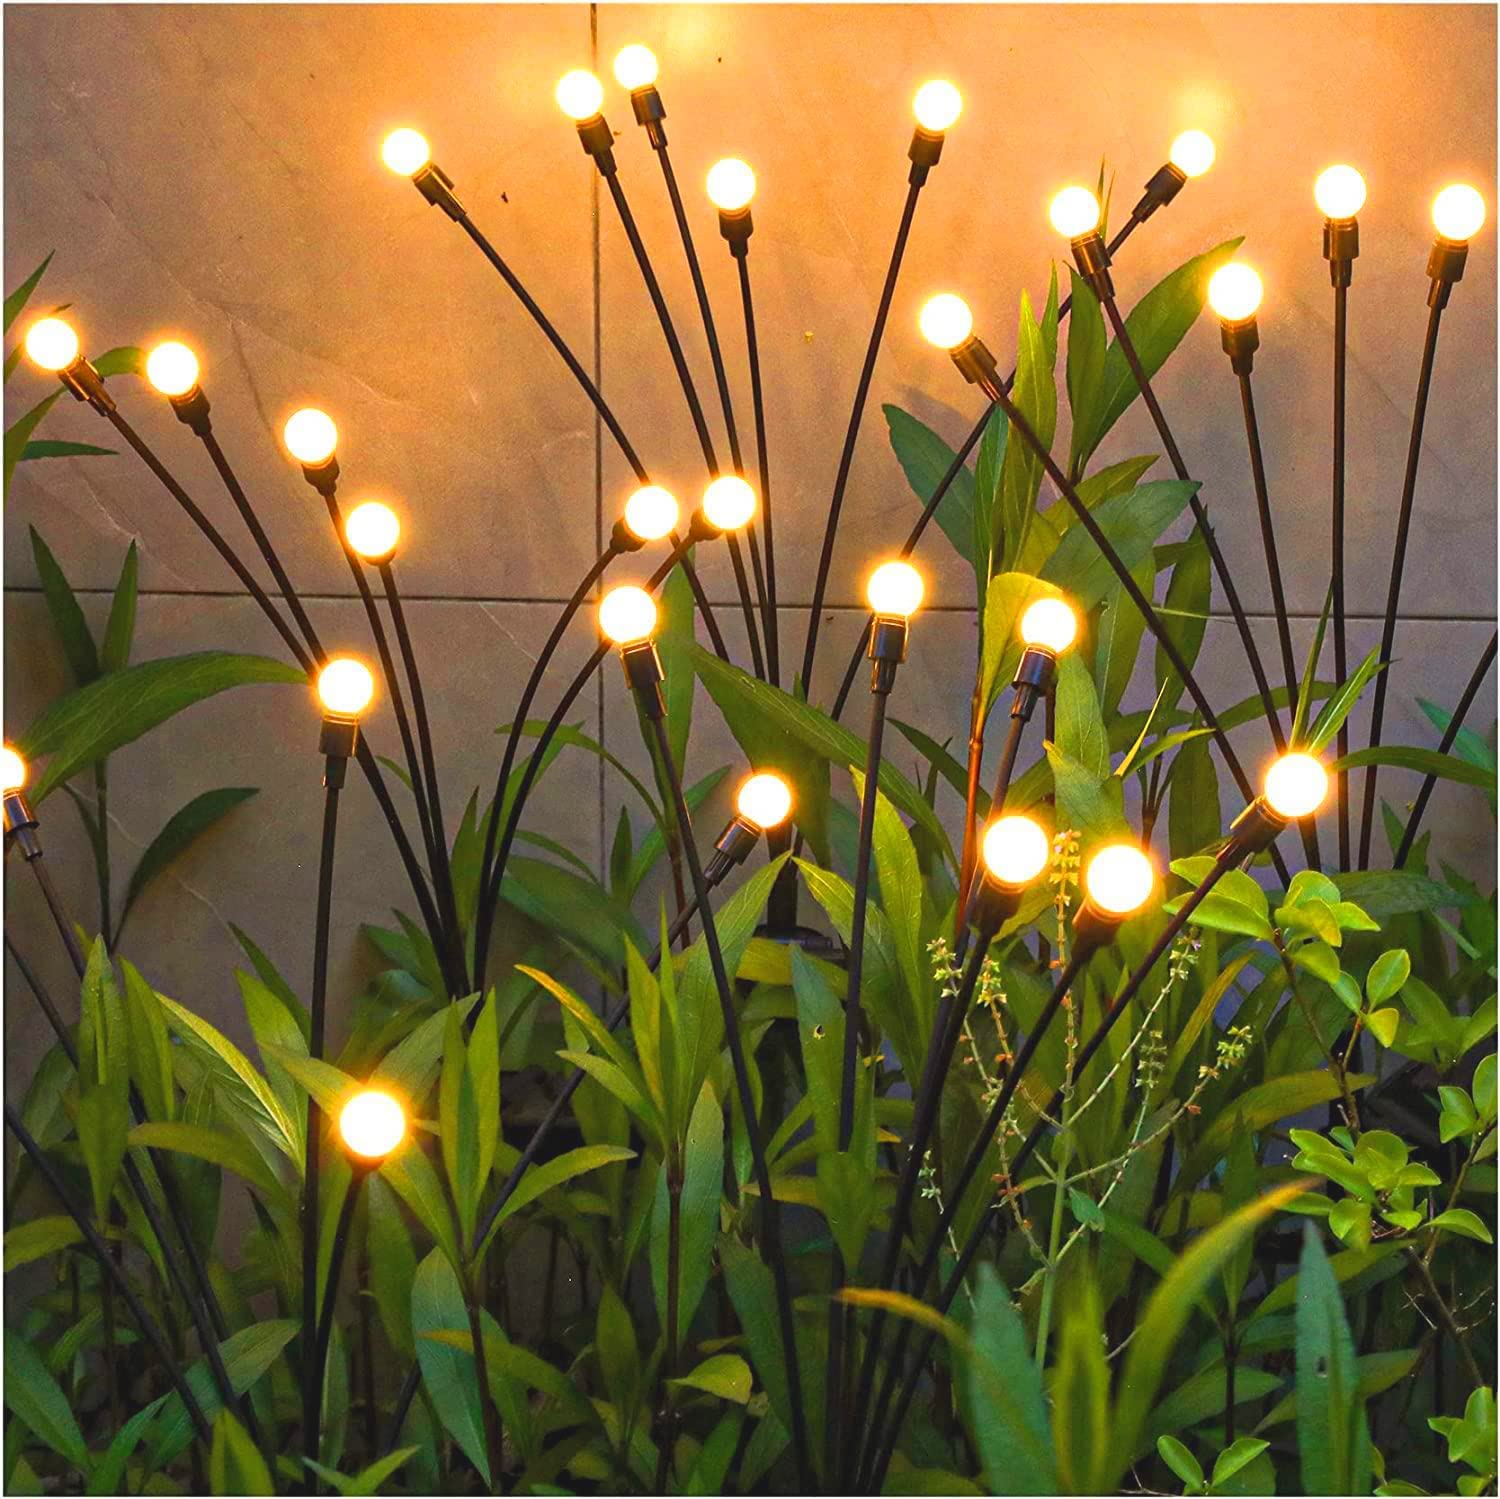 close shot of small stake lights shaped like blades of grass among plants in garden